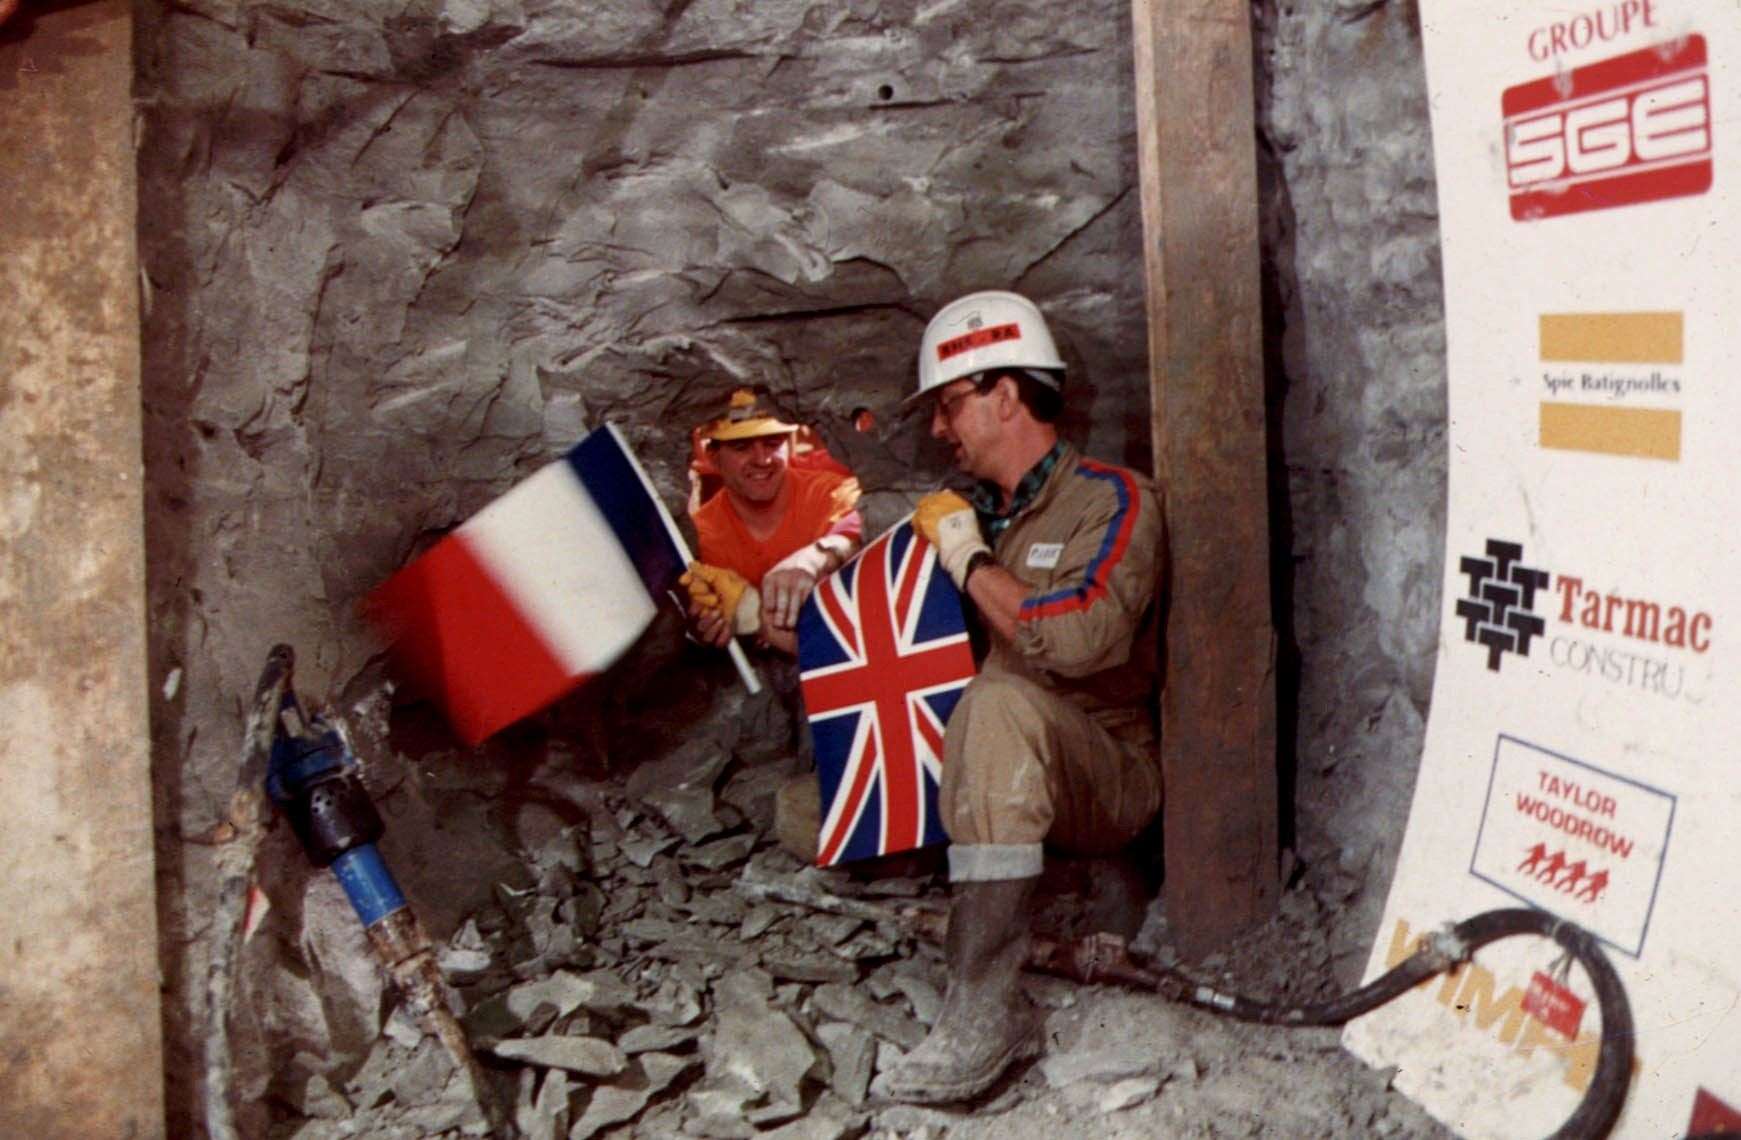 English Channel Tunnel worker Graham Fagg meets French counterpart Philippe Cozette when the two ends of the tunnel finally met in December 1990